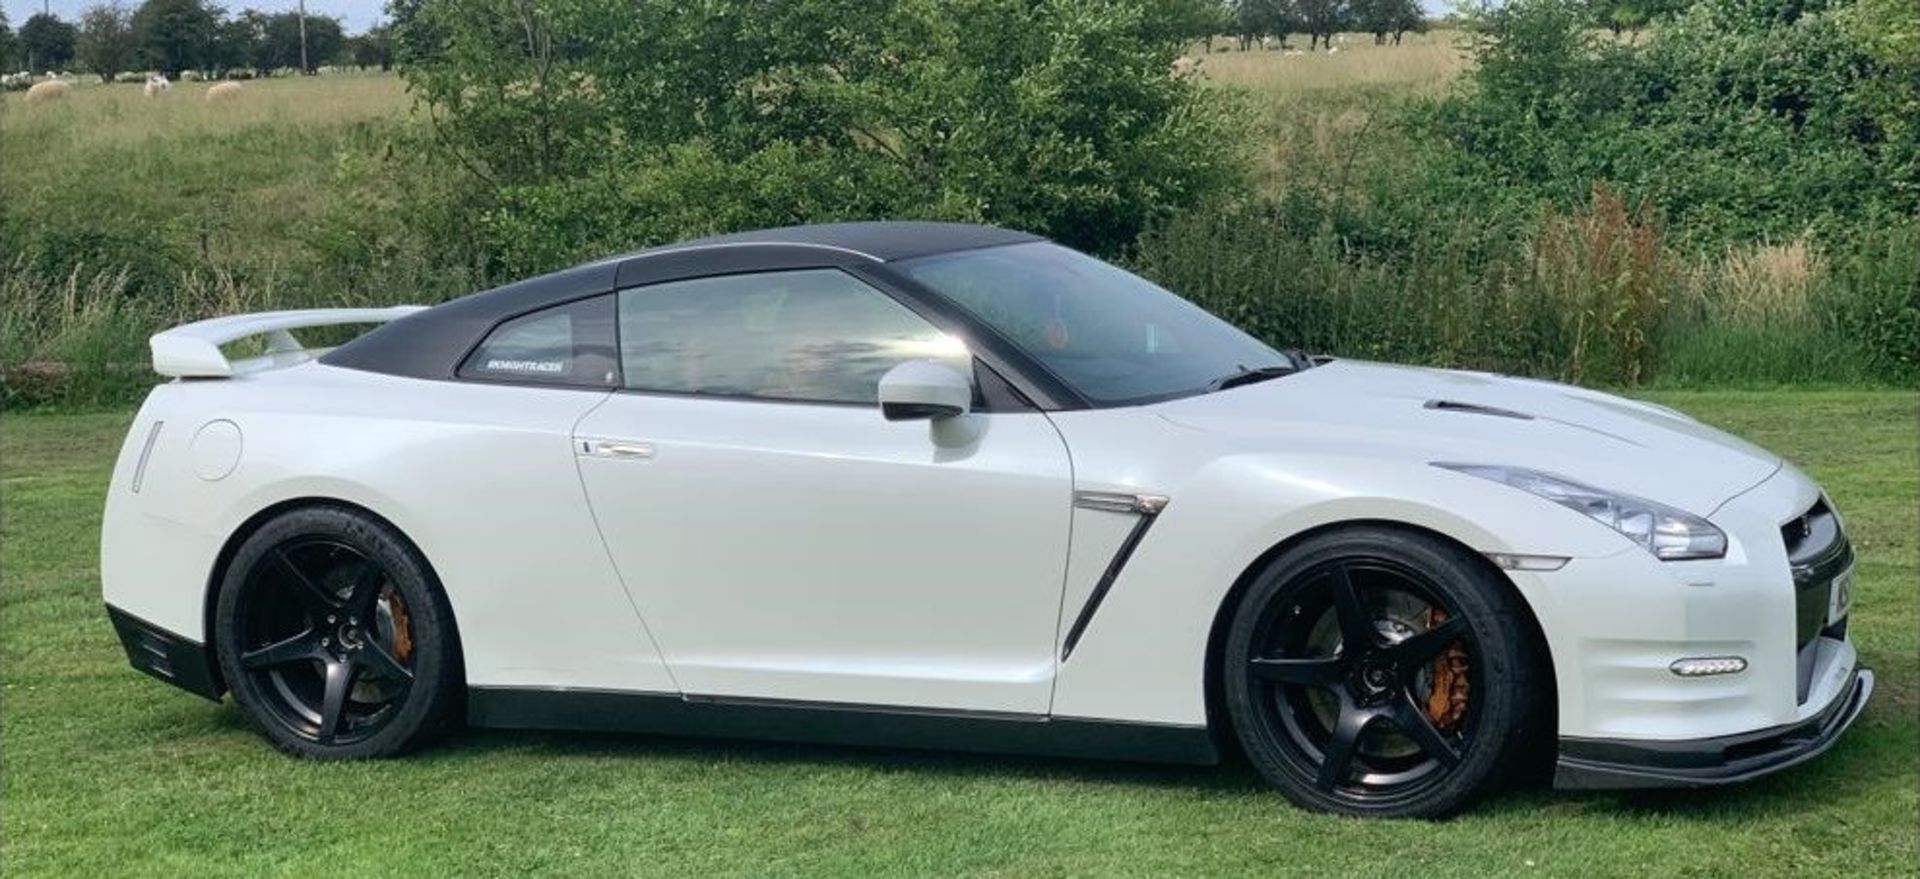 2011/11 REG NISSAN GT-R R35 PREMIUM EDITION S-A ONE FORMER KEEPER FROM NEW 22K MILES - WARRANTED! - Image 2 of 22